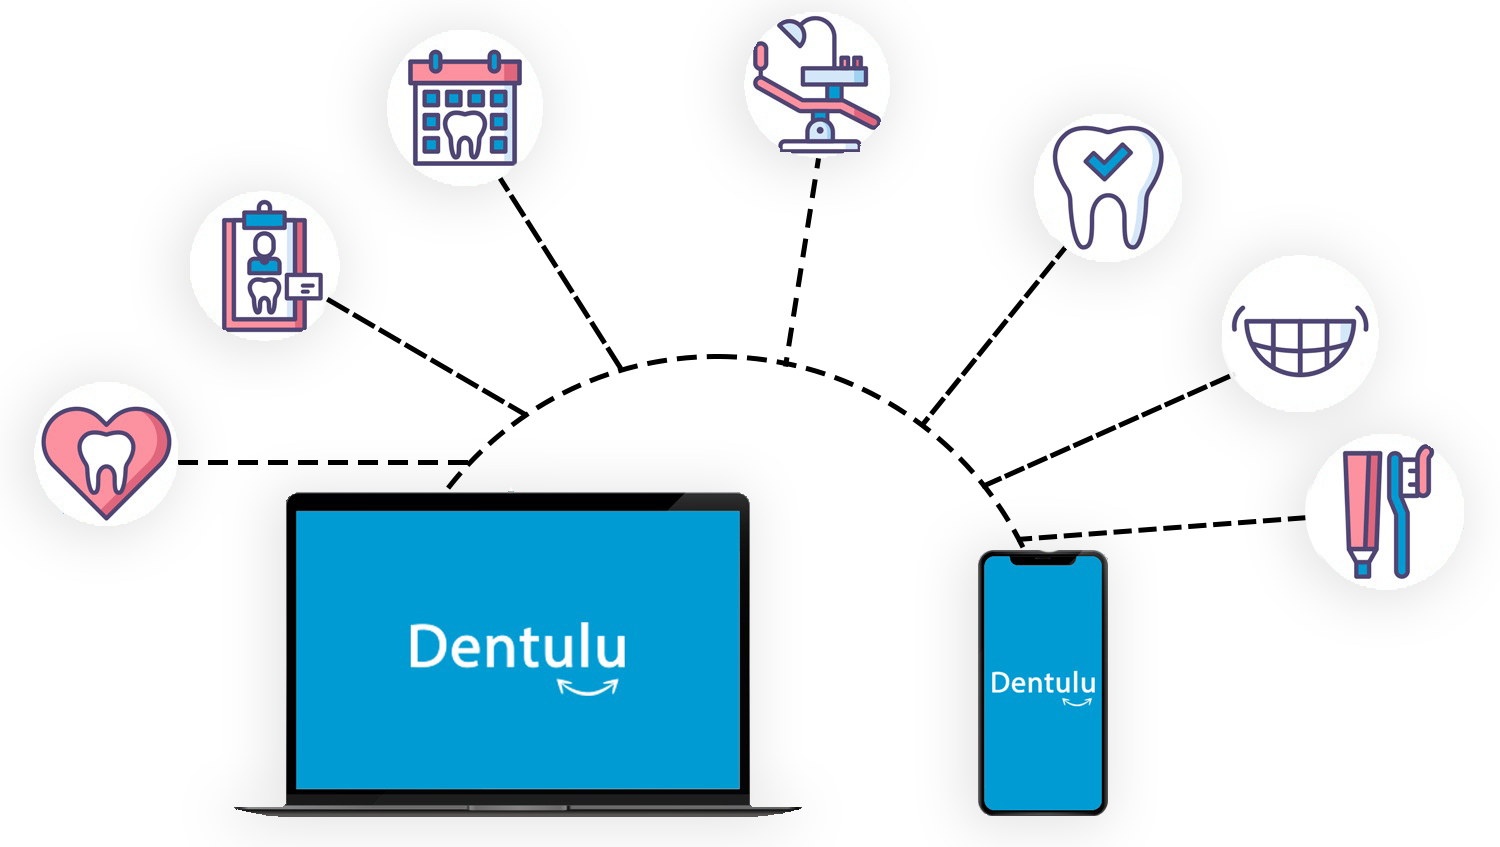 access dental health records from integrated services